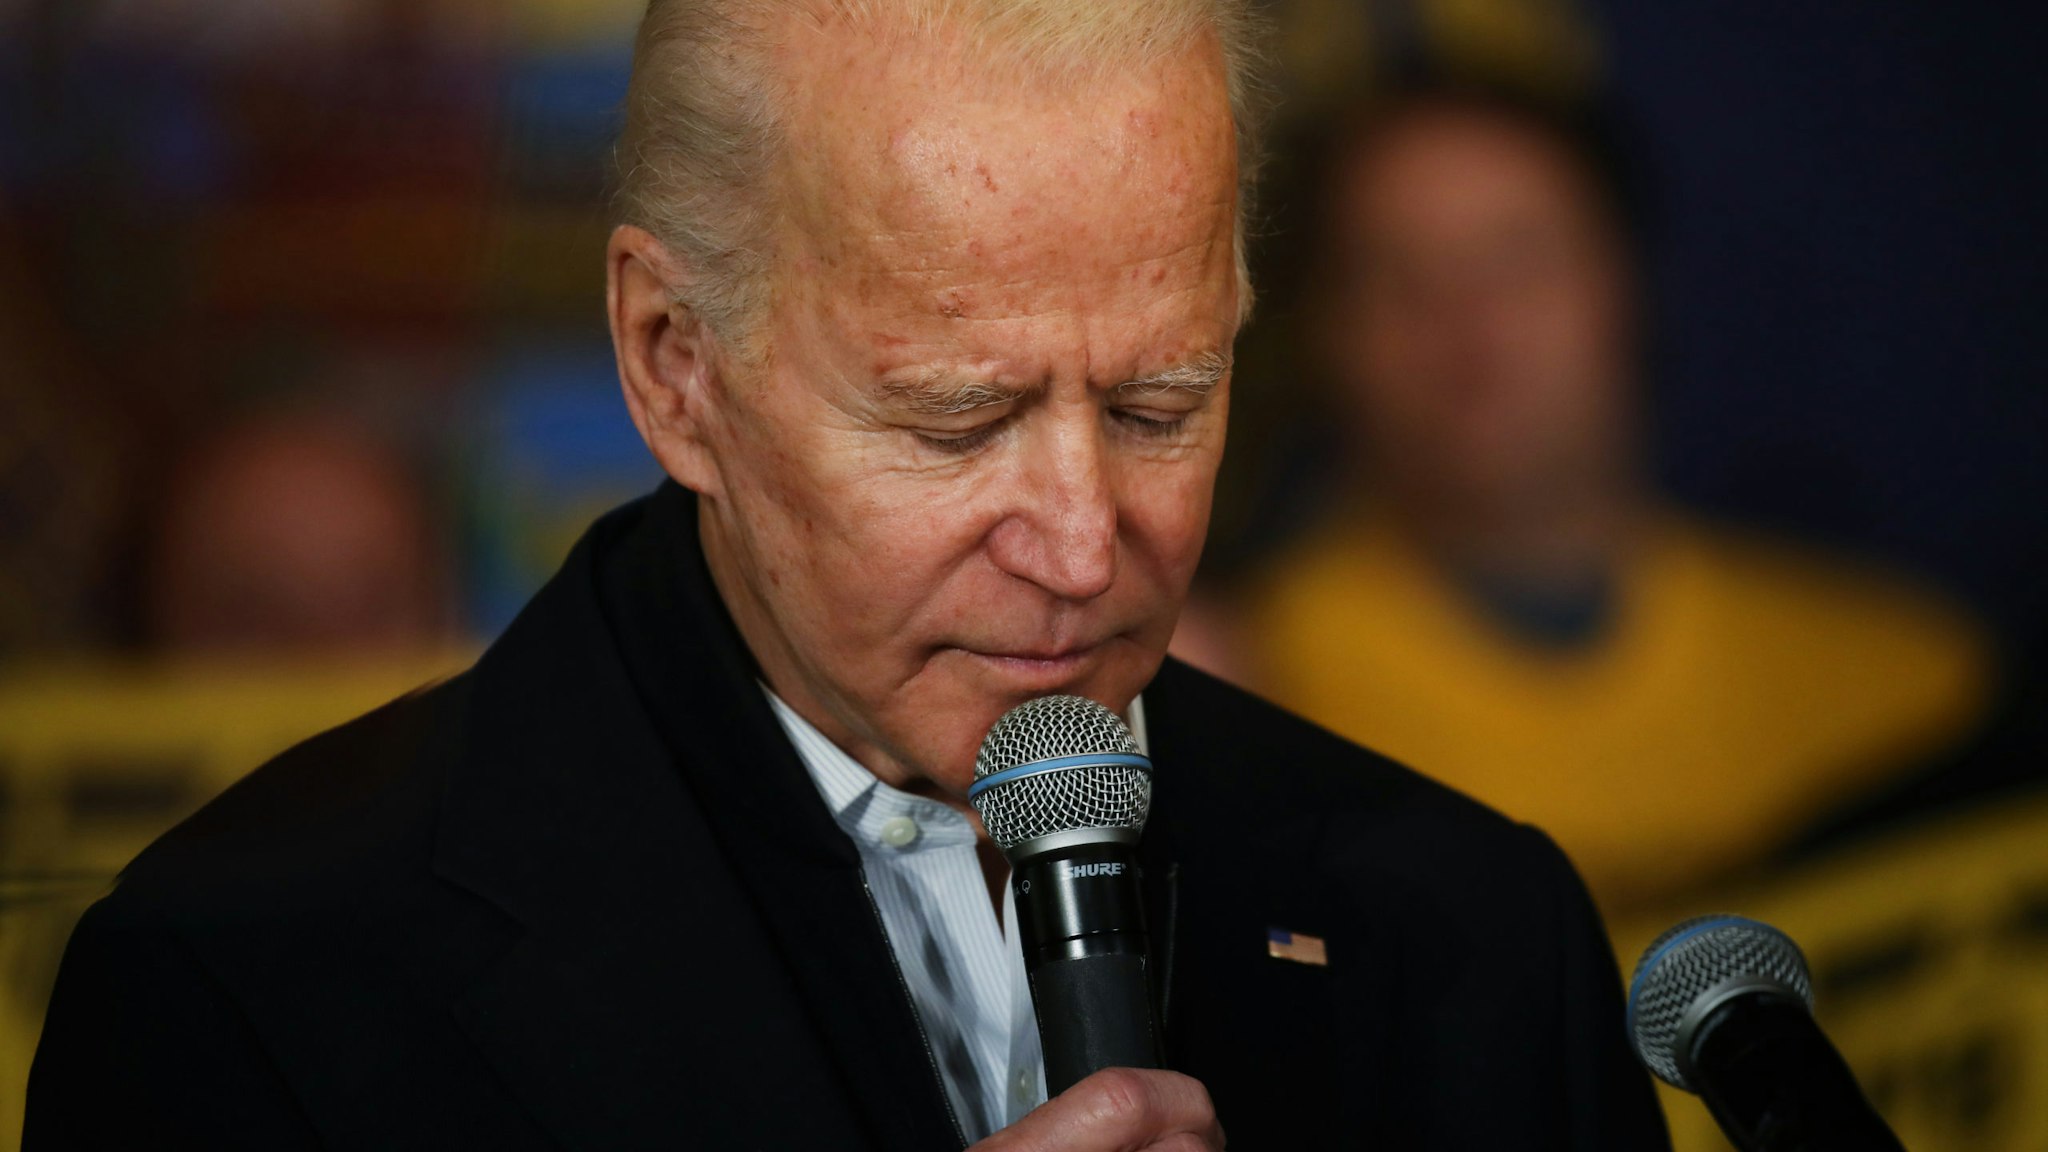 SOMERSWORTH, NEW HAMPSHIRE - FEBRUARY 05: Democratic presidential candidate former Vice President Joe Biden speaks at an event on February 05, 2020 in Somersworth, New Hampshire. Following his fourth-place finish in the Iowa Caucus, the former vice president is seeking to gather momentum for his candidacy in New Hampshire. (Photo by Spencer Platt/Getty Images)